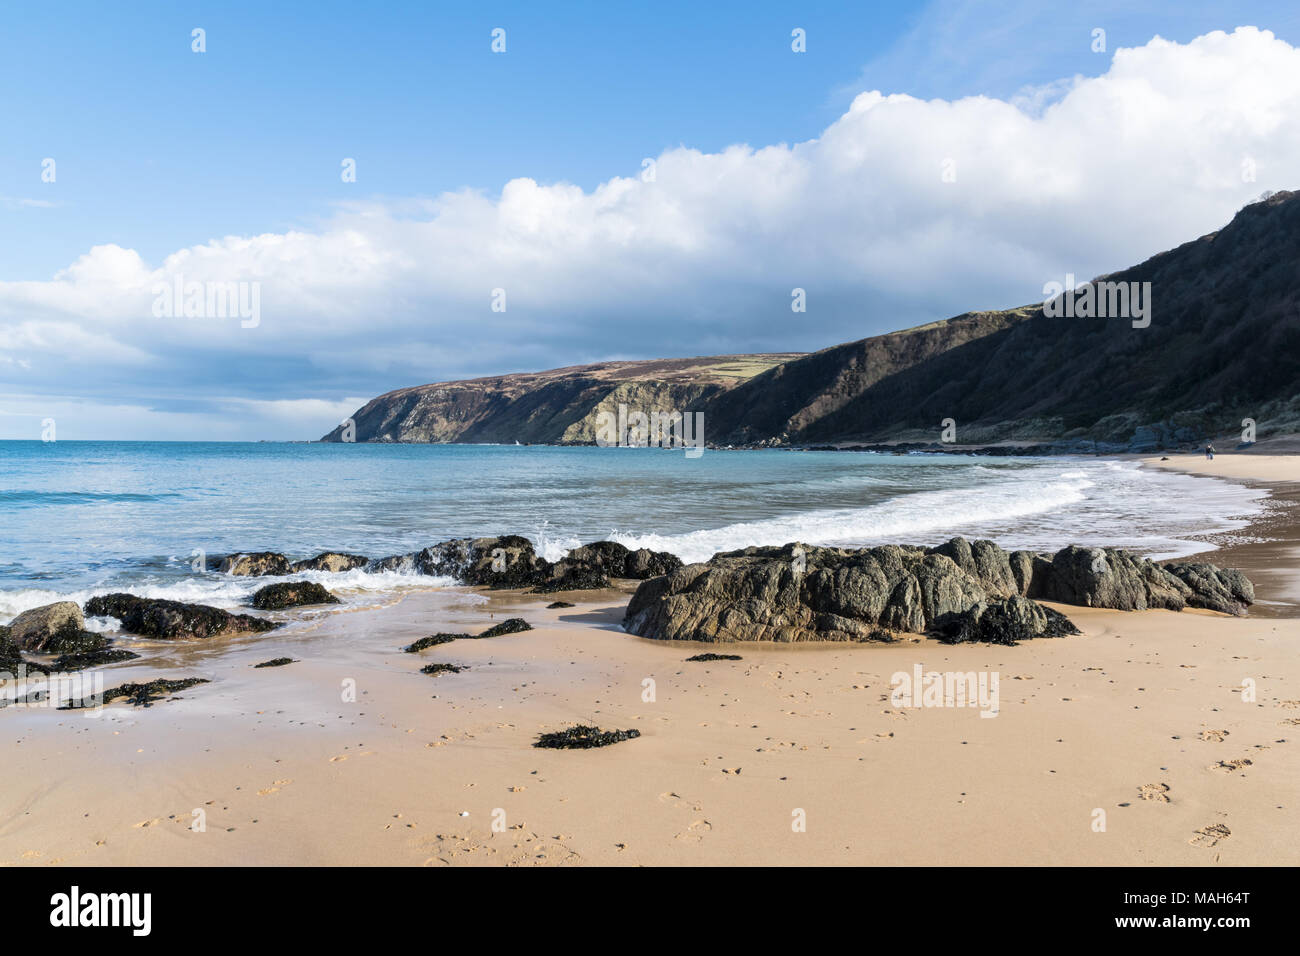 This is Kinnagoe Bay in County Donegal in Ireland. It has white sandy beaches with turquoise water. Stock Photo